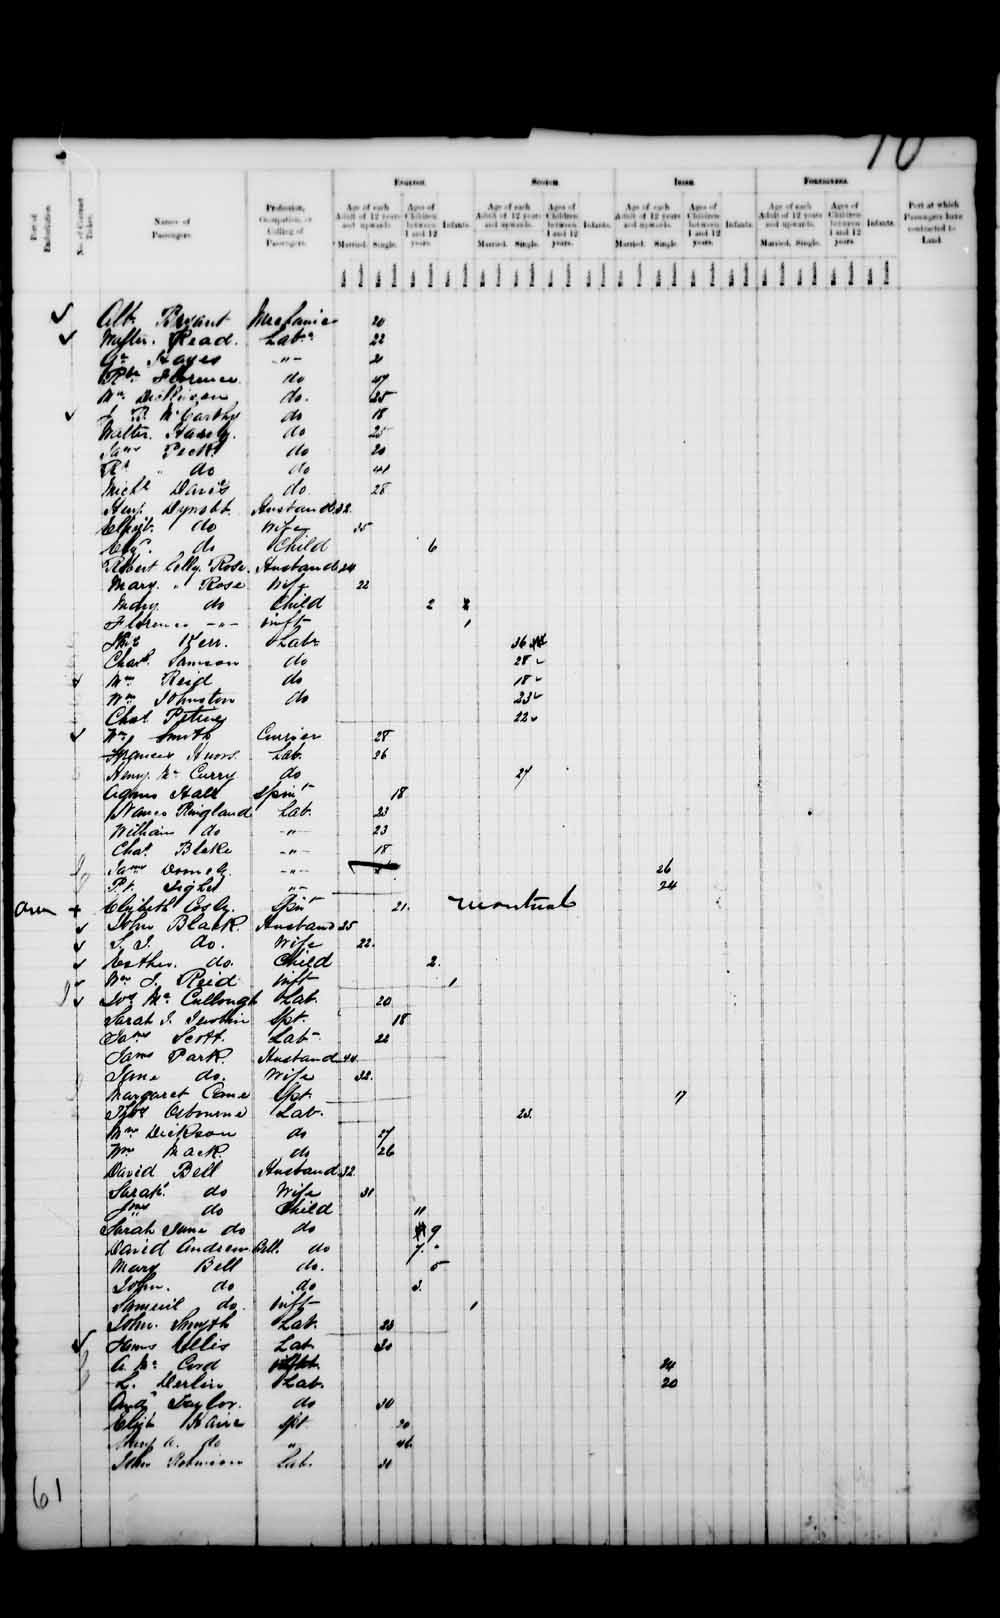 Digitized page of Passenger Lists for Image No.: e003541453